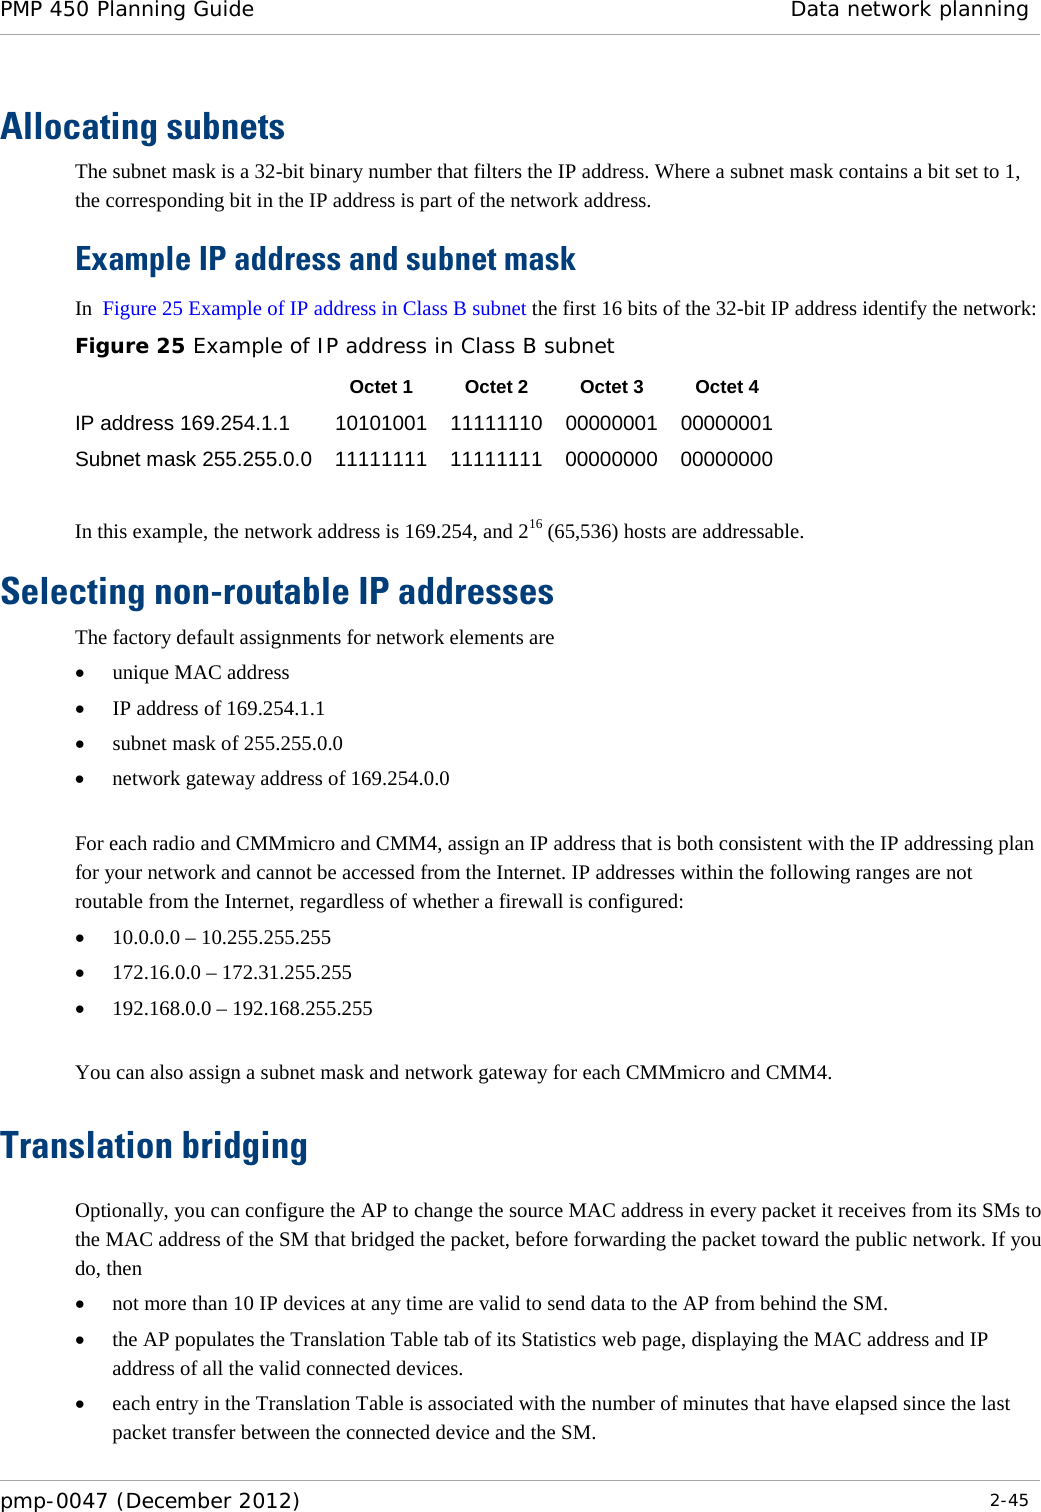 PMP 450 Planning Guide Data network planning  pmp-0047 (December 2012)  2-45  Allocating subnets The subnet mask is a 32-bit binary number that filters the IP address. Where a subnet mask contains a bit set to 1, the corresponding bit in the IP address is part of the network address.    Example IP address and subnet mask In  Figure 25 Example of IP address in Class B subnet the first 16 bits of the 32-bit IP address identify the network: Figure 25 Example of IP address in Class B subnet  Octet 1 Octet 2 Octet 3 Octet 4 IP address 169.254.1.1 10101001 11111110 00000001 00000001 Subnet mask 255.255.0.0 11111111 11111111 00000000 00000000  In this example, the network address is 169.254, and 216 (65,536) hosts are addressable.  Selecting non-routable IP addresses The factory default assignments for network elements are • unique MAC address • IP address of 169.254.1.1 • subnet mask of 255.255.0.0 • network gateway address of 169.254.0.0  For each radio and CMMmicro and CMM4, assign an IP address that is both consistent with the IP addressing plan for your network and cannot be accessed from the Internet. IP addresses within the following ranges are not routable from the Internet, regardless of whether a firewall is configured: • 10.0.0.0 – 10.255.255.255 • 172.16.0.0 – 172.31.255.255 • 192.168.0.0 – 192.168.255.255  You can also assign a subnet mask and network gateway for each CMMmicro and CMM4. Translation bridging Optionally, you can configure the AP to change the source MAC address in every packet it receives from its SMs to the MAC address of the SM that bridged the packet, before forwarding the packet toward the public network. If you do, then • not more than 10 IP devices at any time are valid to send data to the AP from behind the SM. • the AP populates the Translation Table tab of its Statistics web page, displaying the MAC address and IP address of all the valid connected devices. • each entry in the Translation Table is associated with the number of minutes that have elapsed since the last packet transfer between the connected device and the SM. 